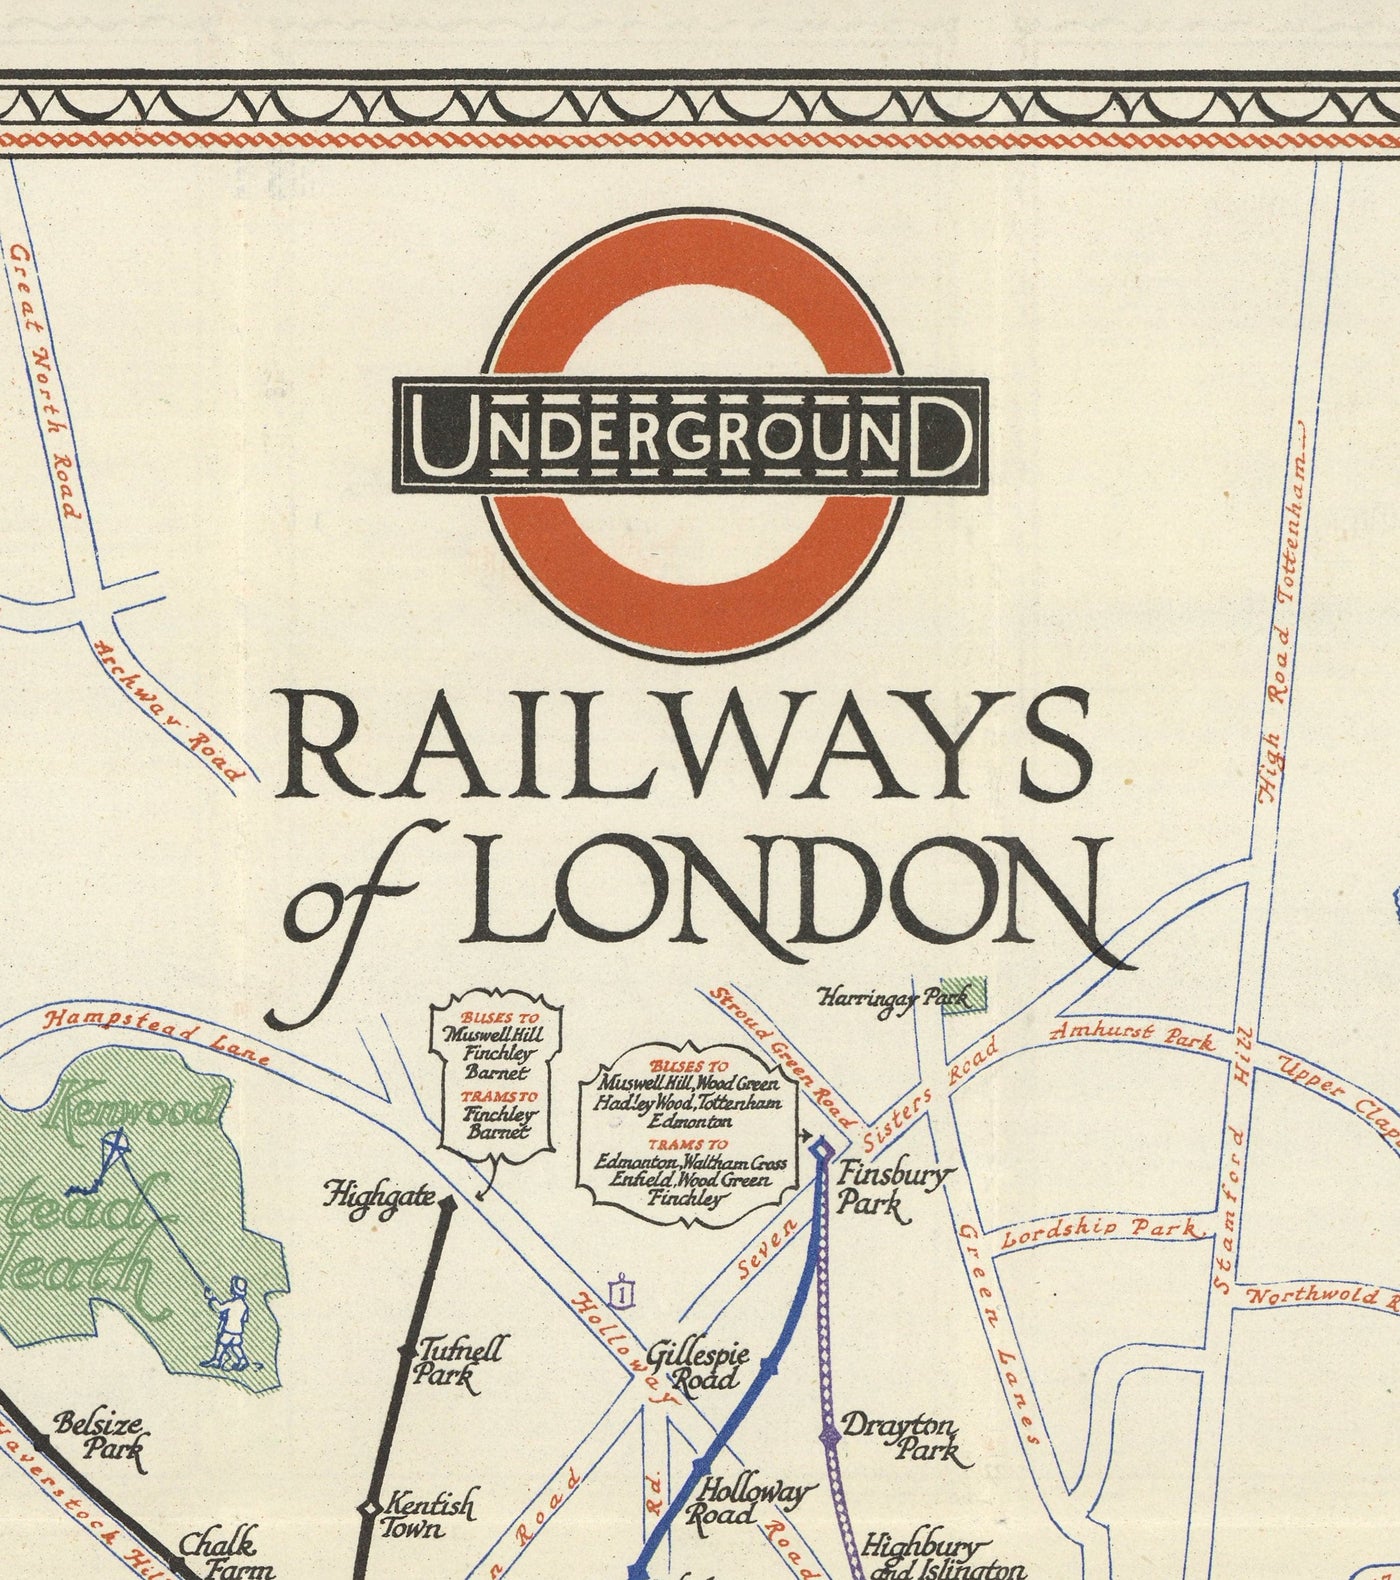 Rare Old London Tube de métro, 1928 - Covent Garden, Piccadilly Circus, Central & District Line